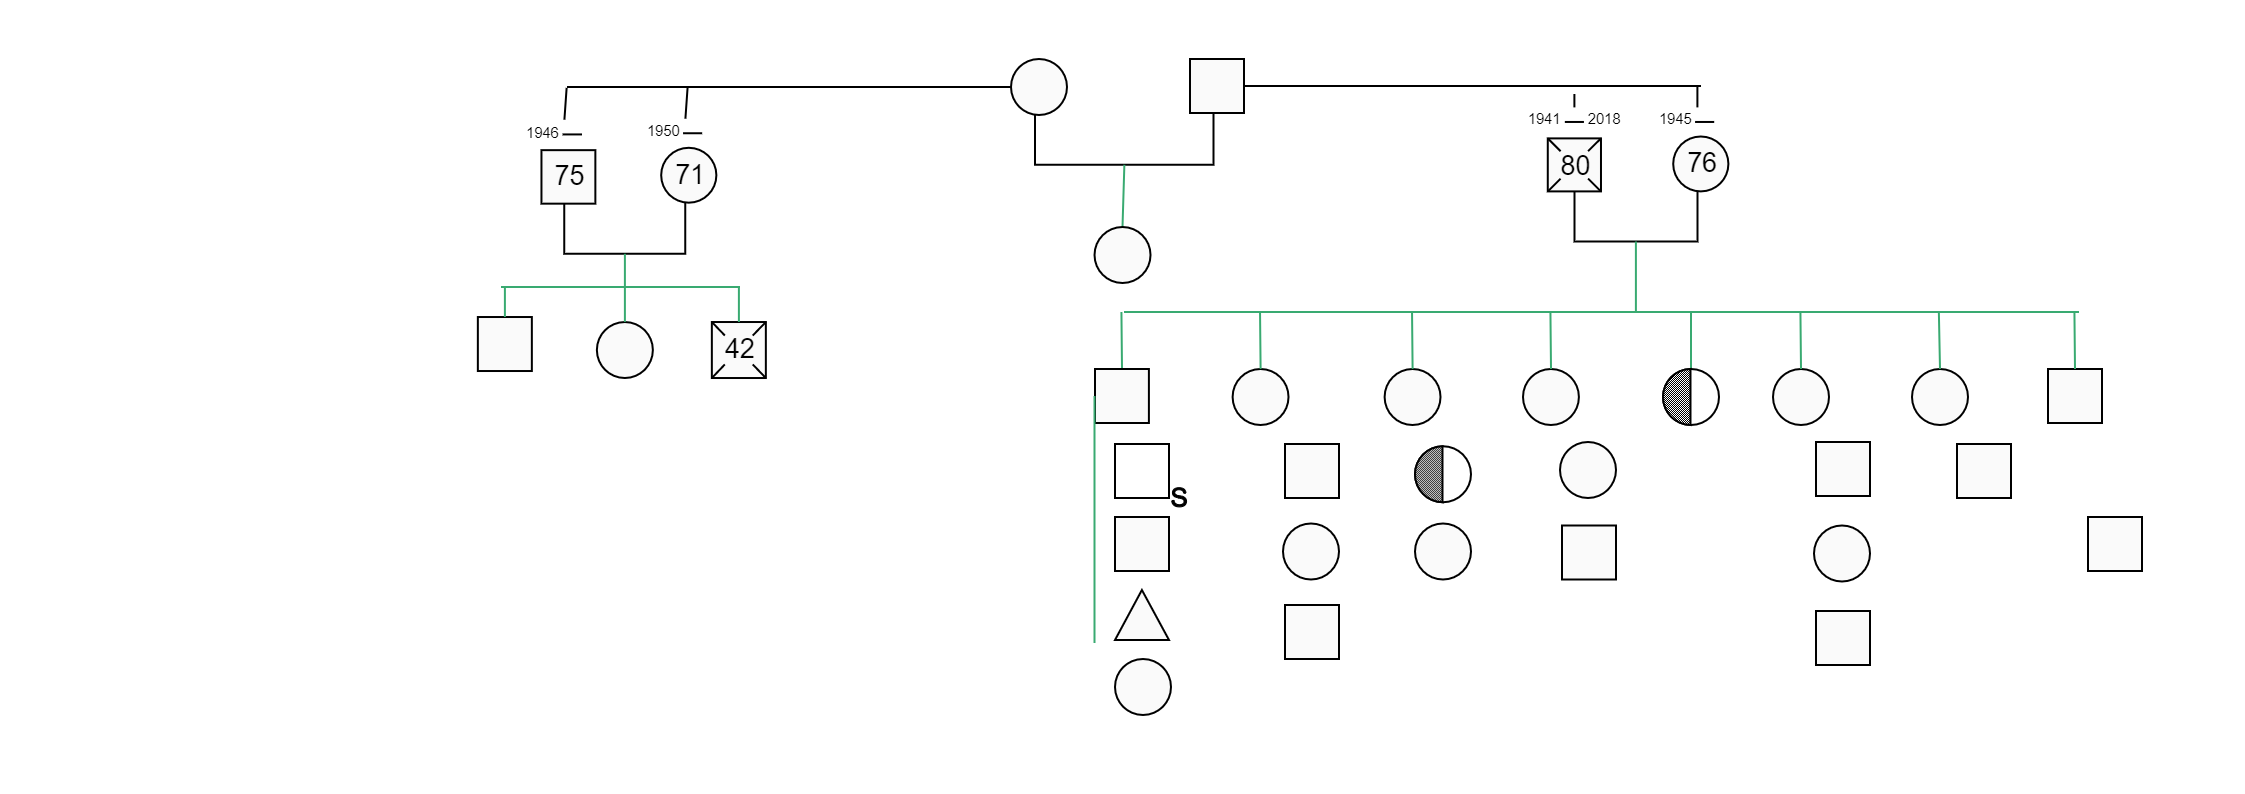 Here shows the Graphic of Almira's family tree information.  A genogram is a visual mapping tool that illustrates a person's family tree, relationships, and history. It is more than the traditional family tree giving insights into the medical history and